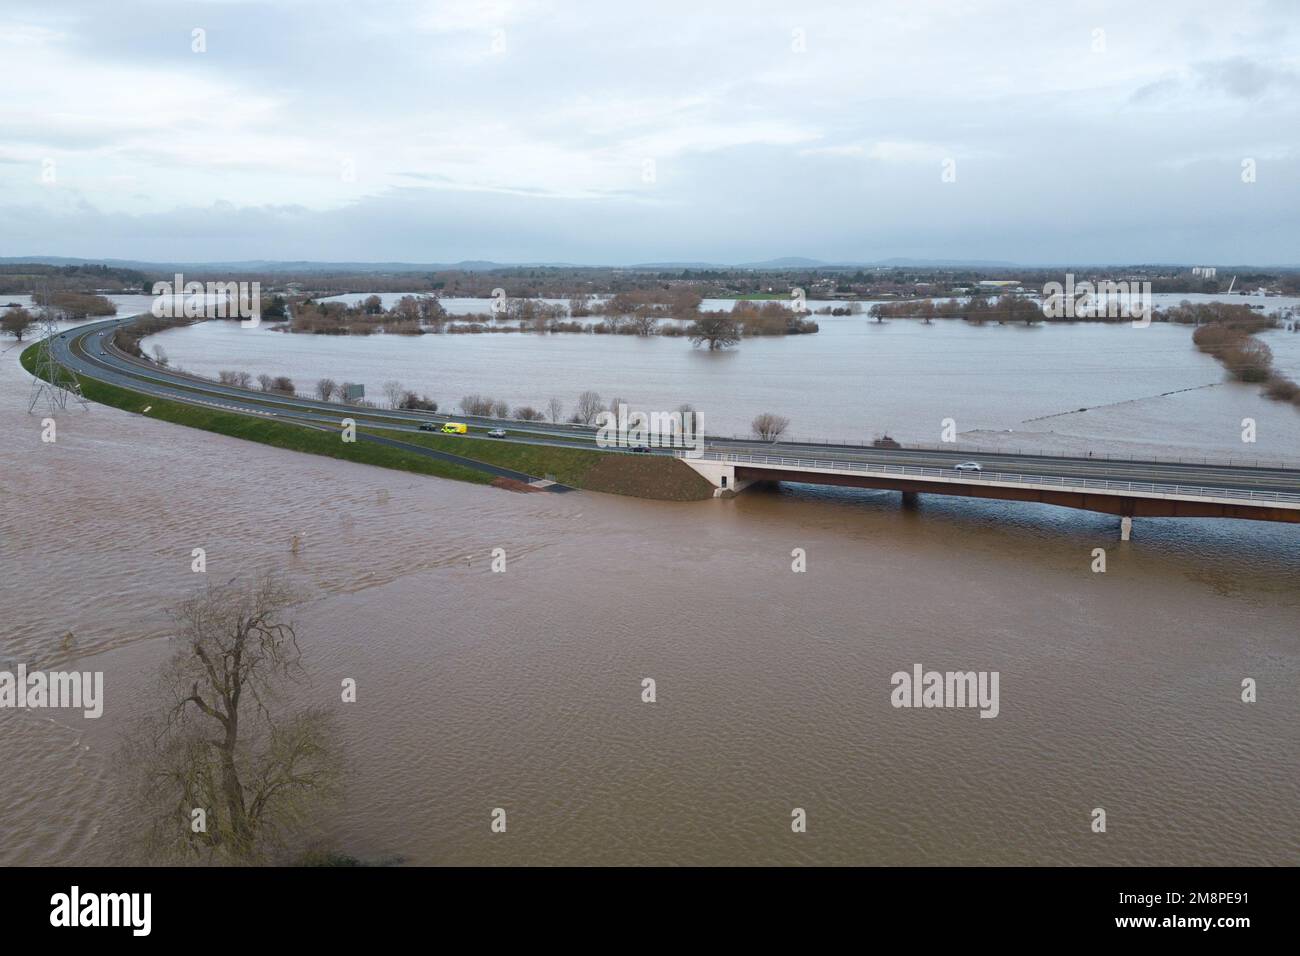 Worcester, Worcestershire, January 15th 2023 - The elevated A440 bypass on the outskirts of Worcester is surrounded by a huge swathe of flood water after the River Severn burst its banks. Credit: Katie Stewart/Alamy Live News Stock Photo